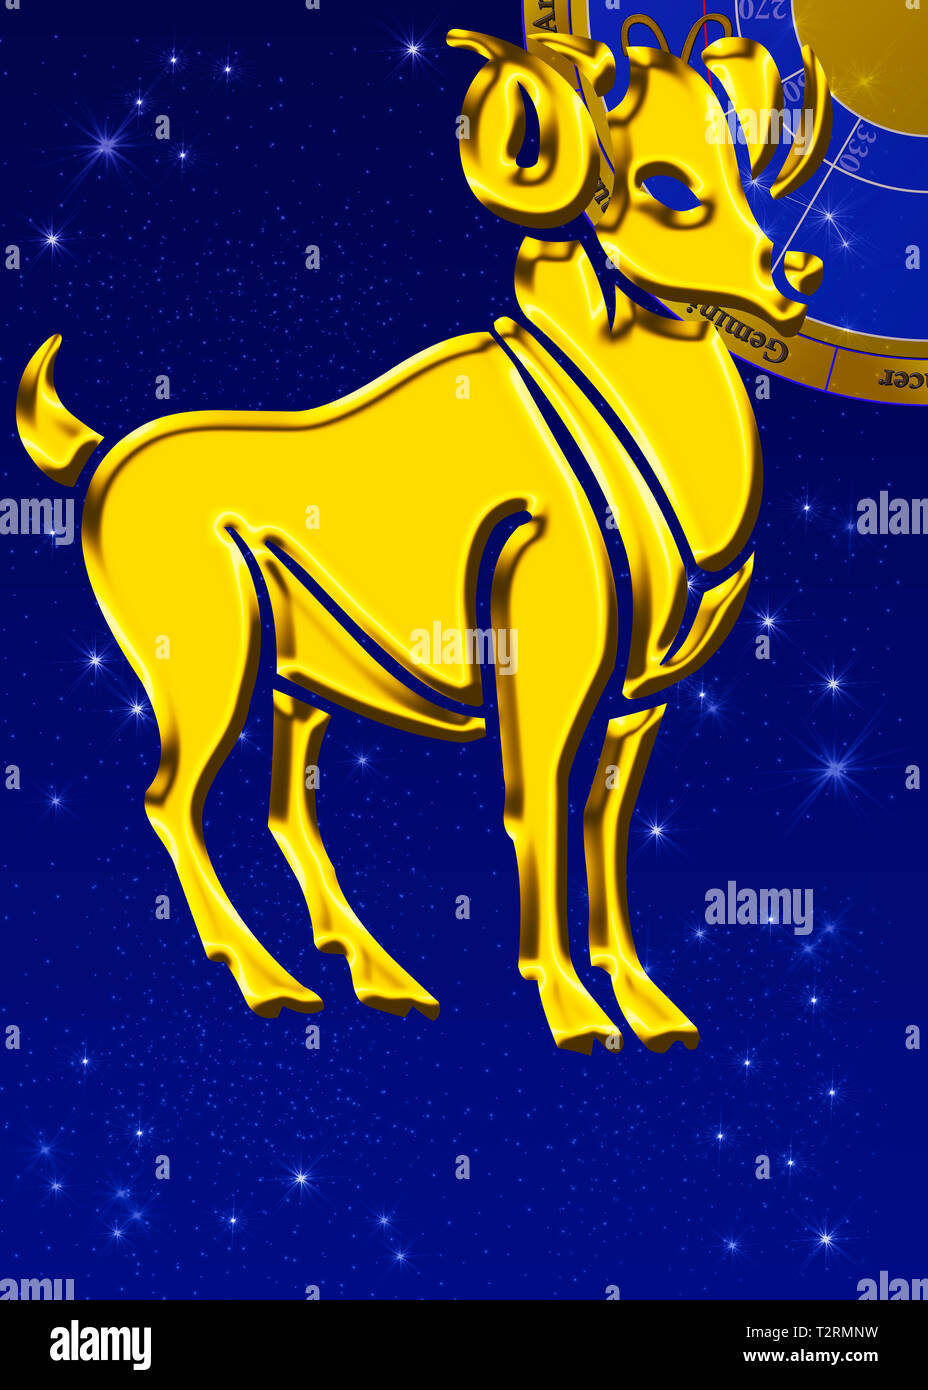 zodiac sign with star image as golden relief in front of a dark blue sky Stock Photo